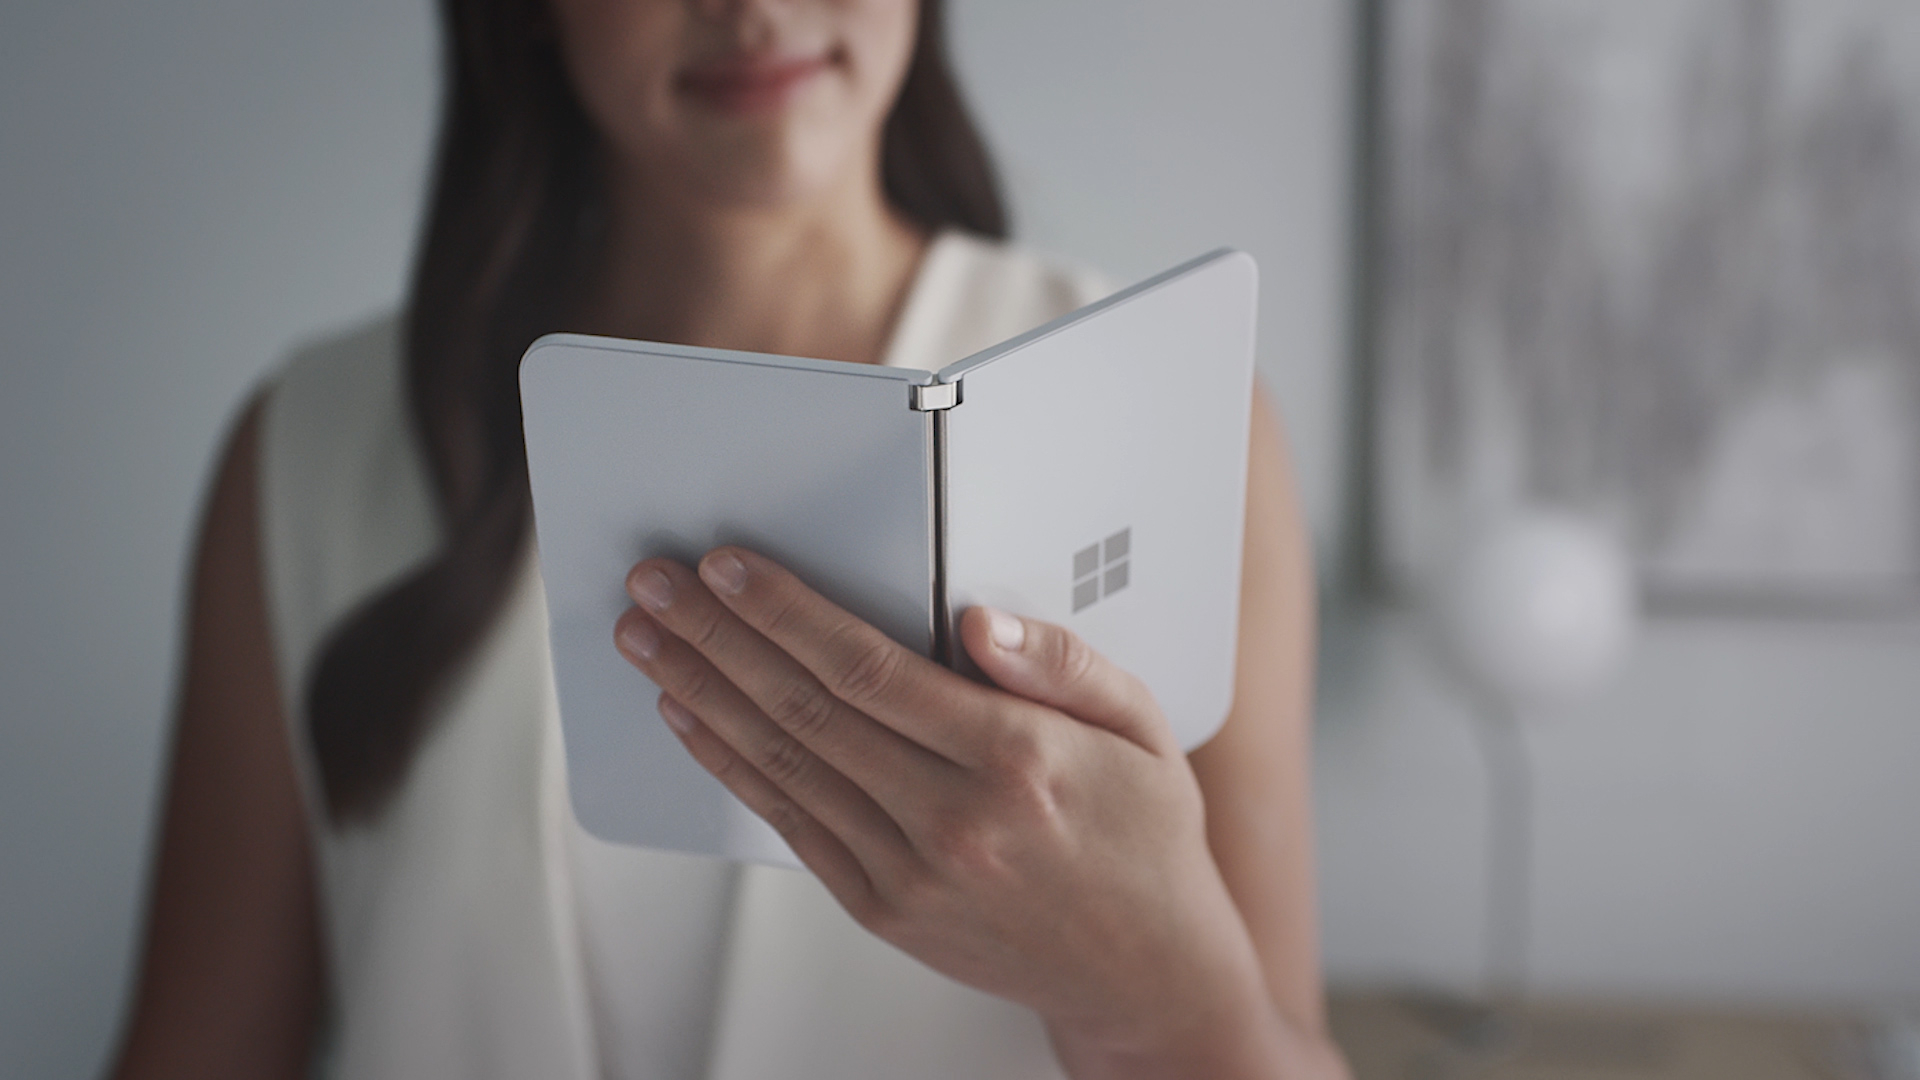 Surface Duo: launch before August 5, 2020 to shade the Galaxy Fold 2